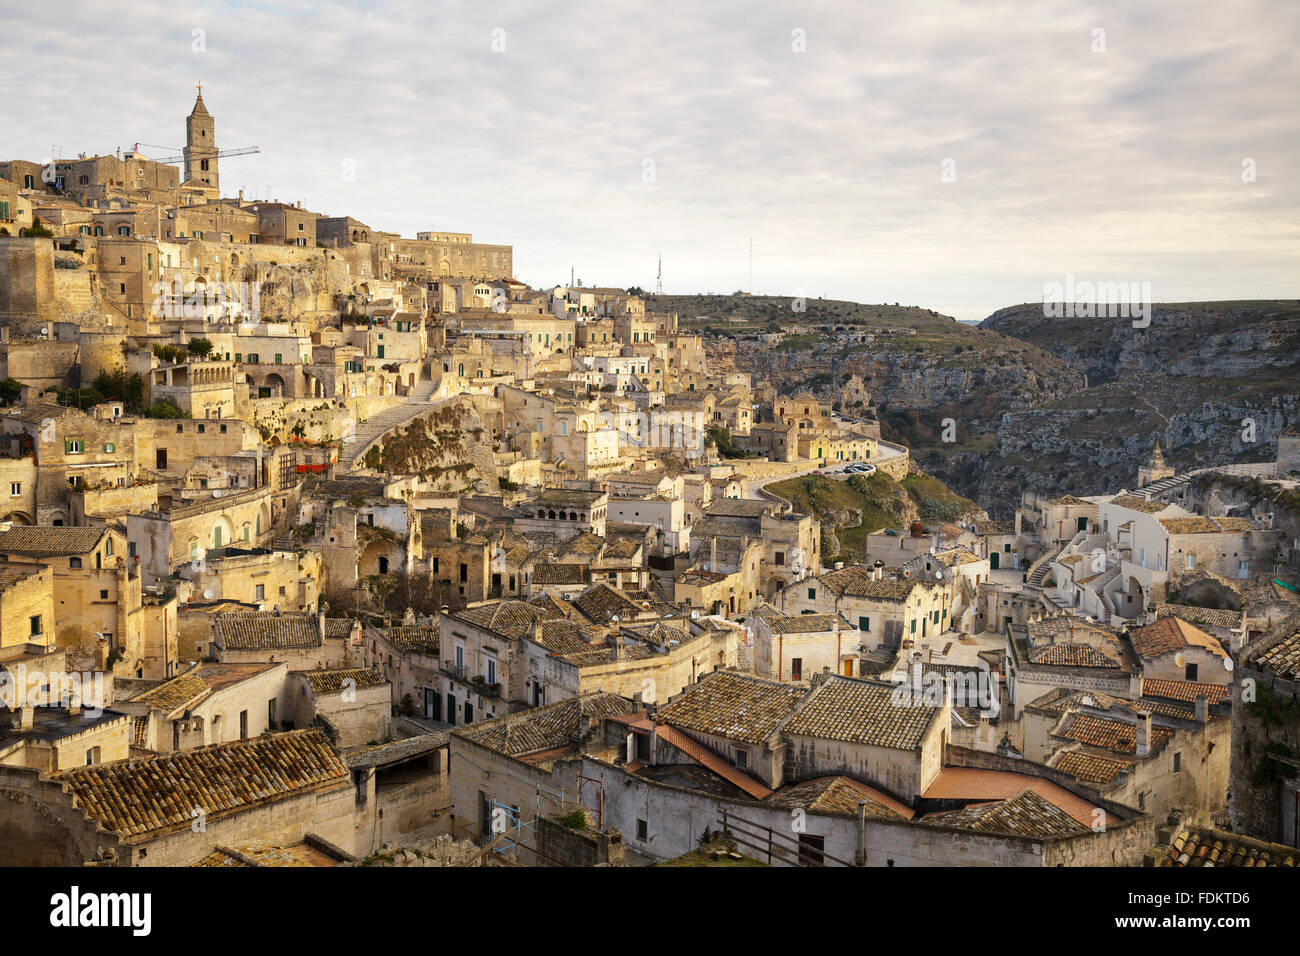 view over the city from viewpoint at Piazzetta Pascoli, Matera, Basilicata, Italy Stock Photo